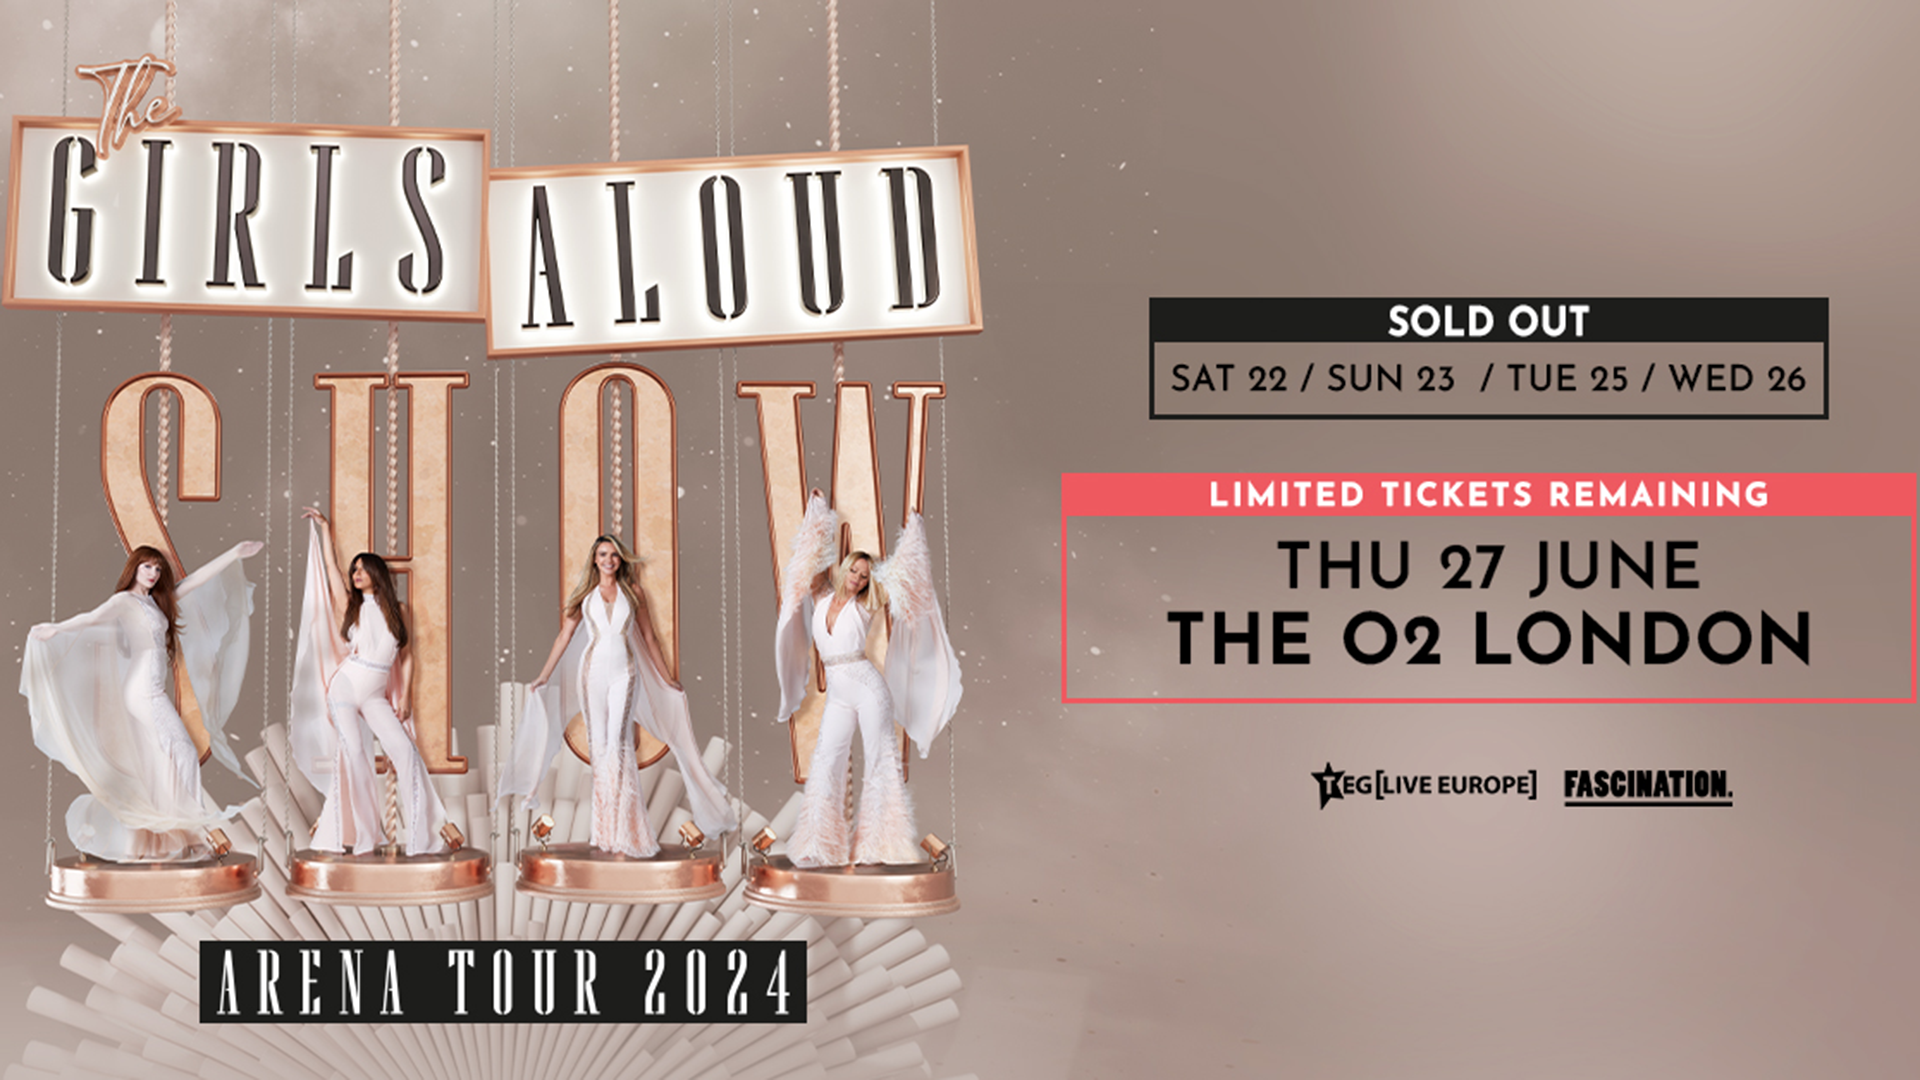 Artwork for Girls Aloud's show at The O2